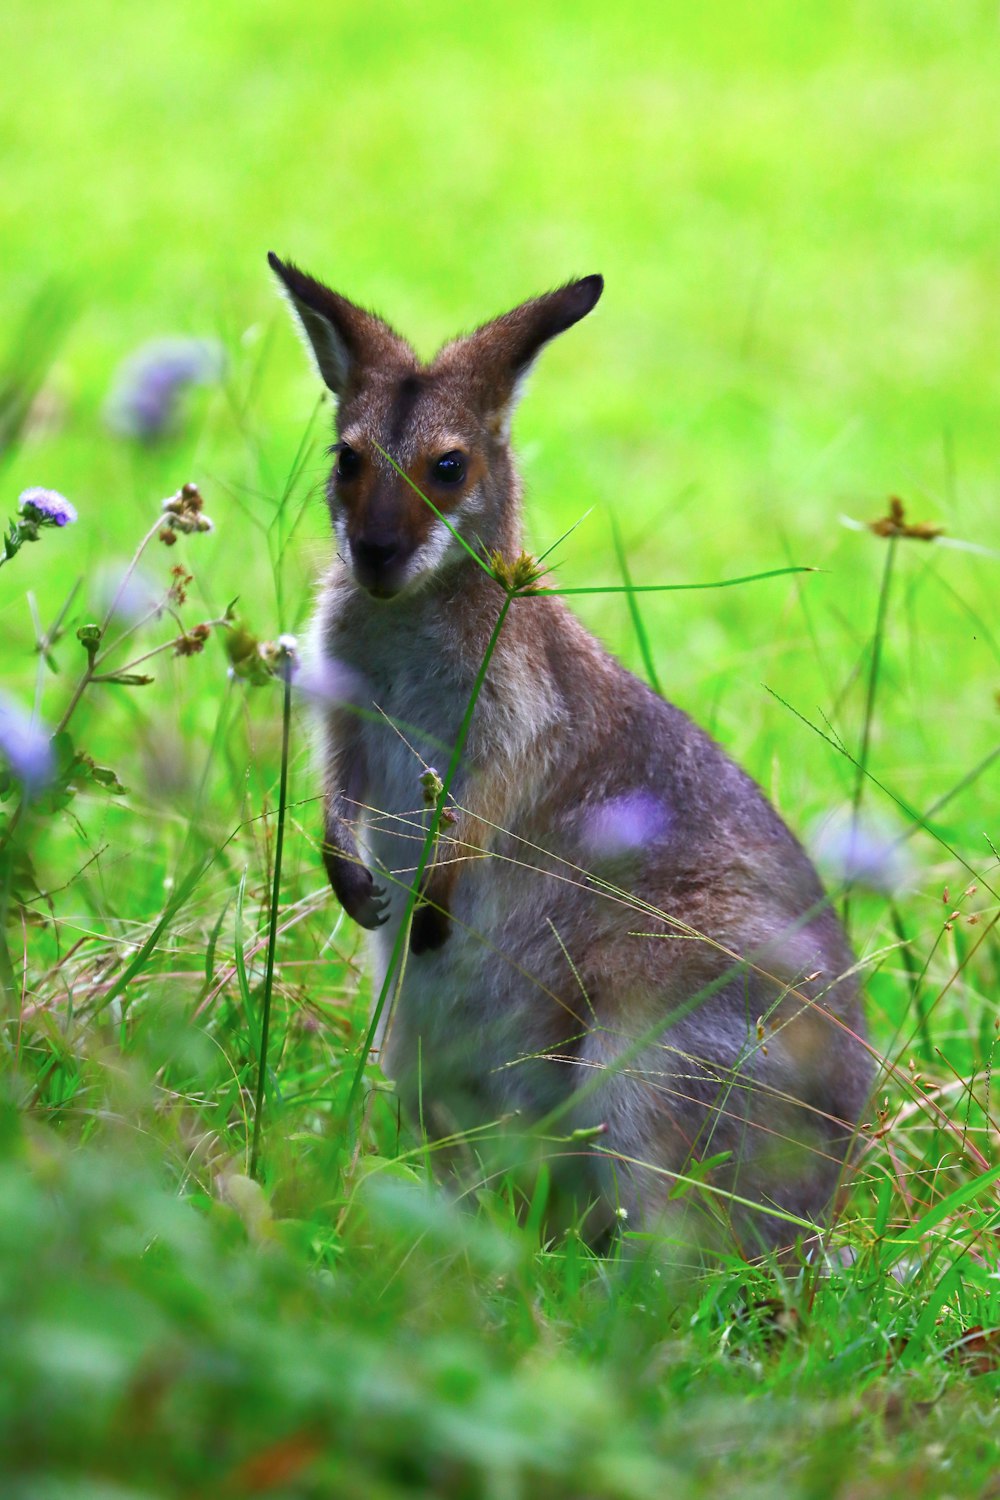 a small kangaroo sitting in a field of grass